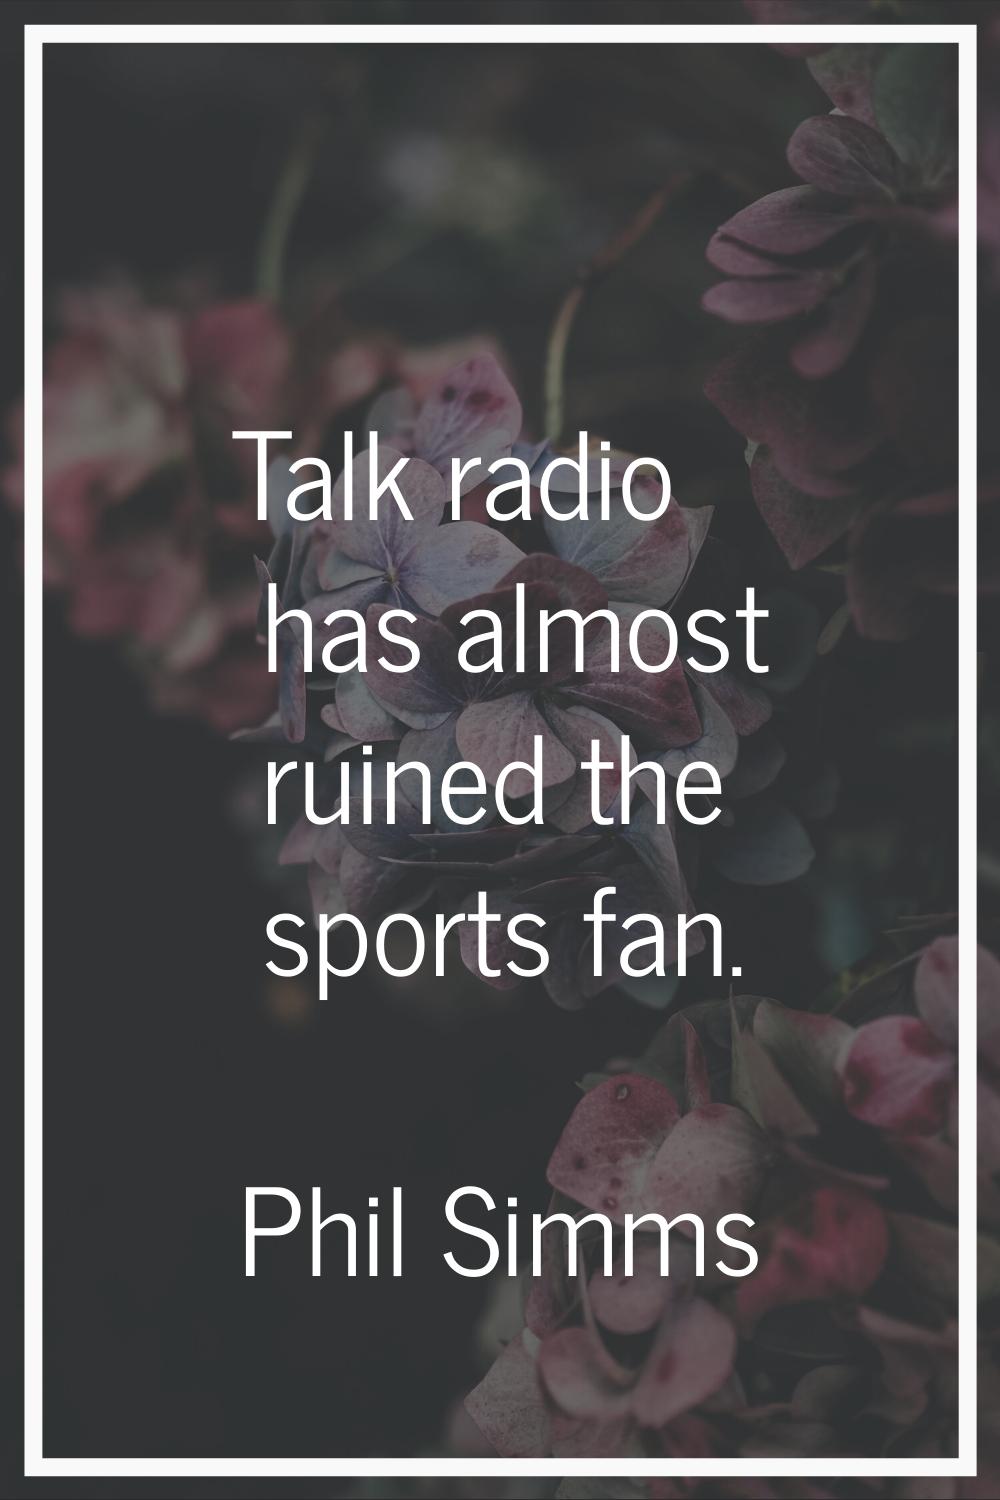 Talk radio has almost ruined the sports fan.